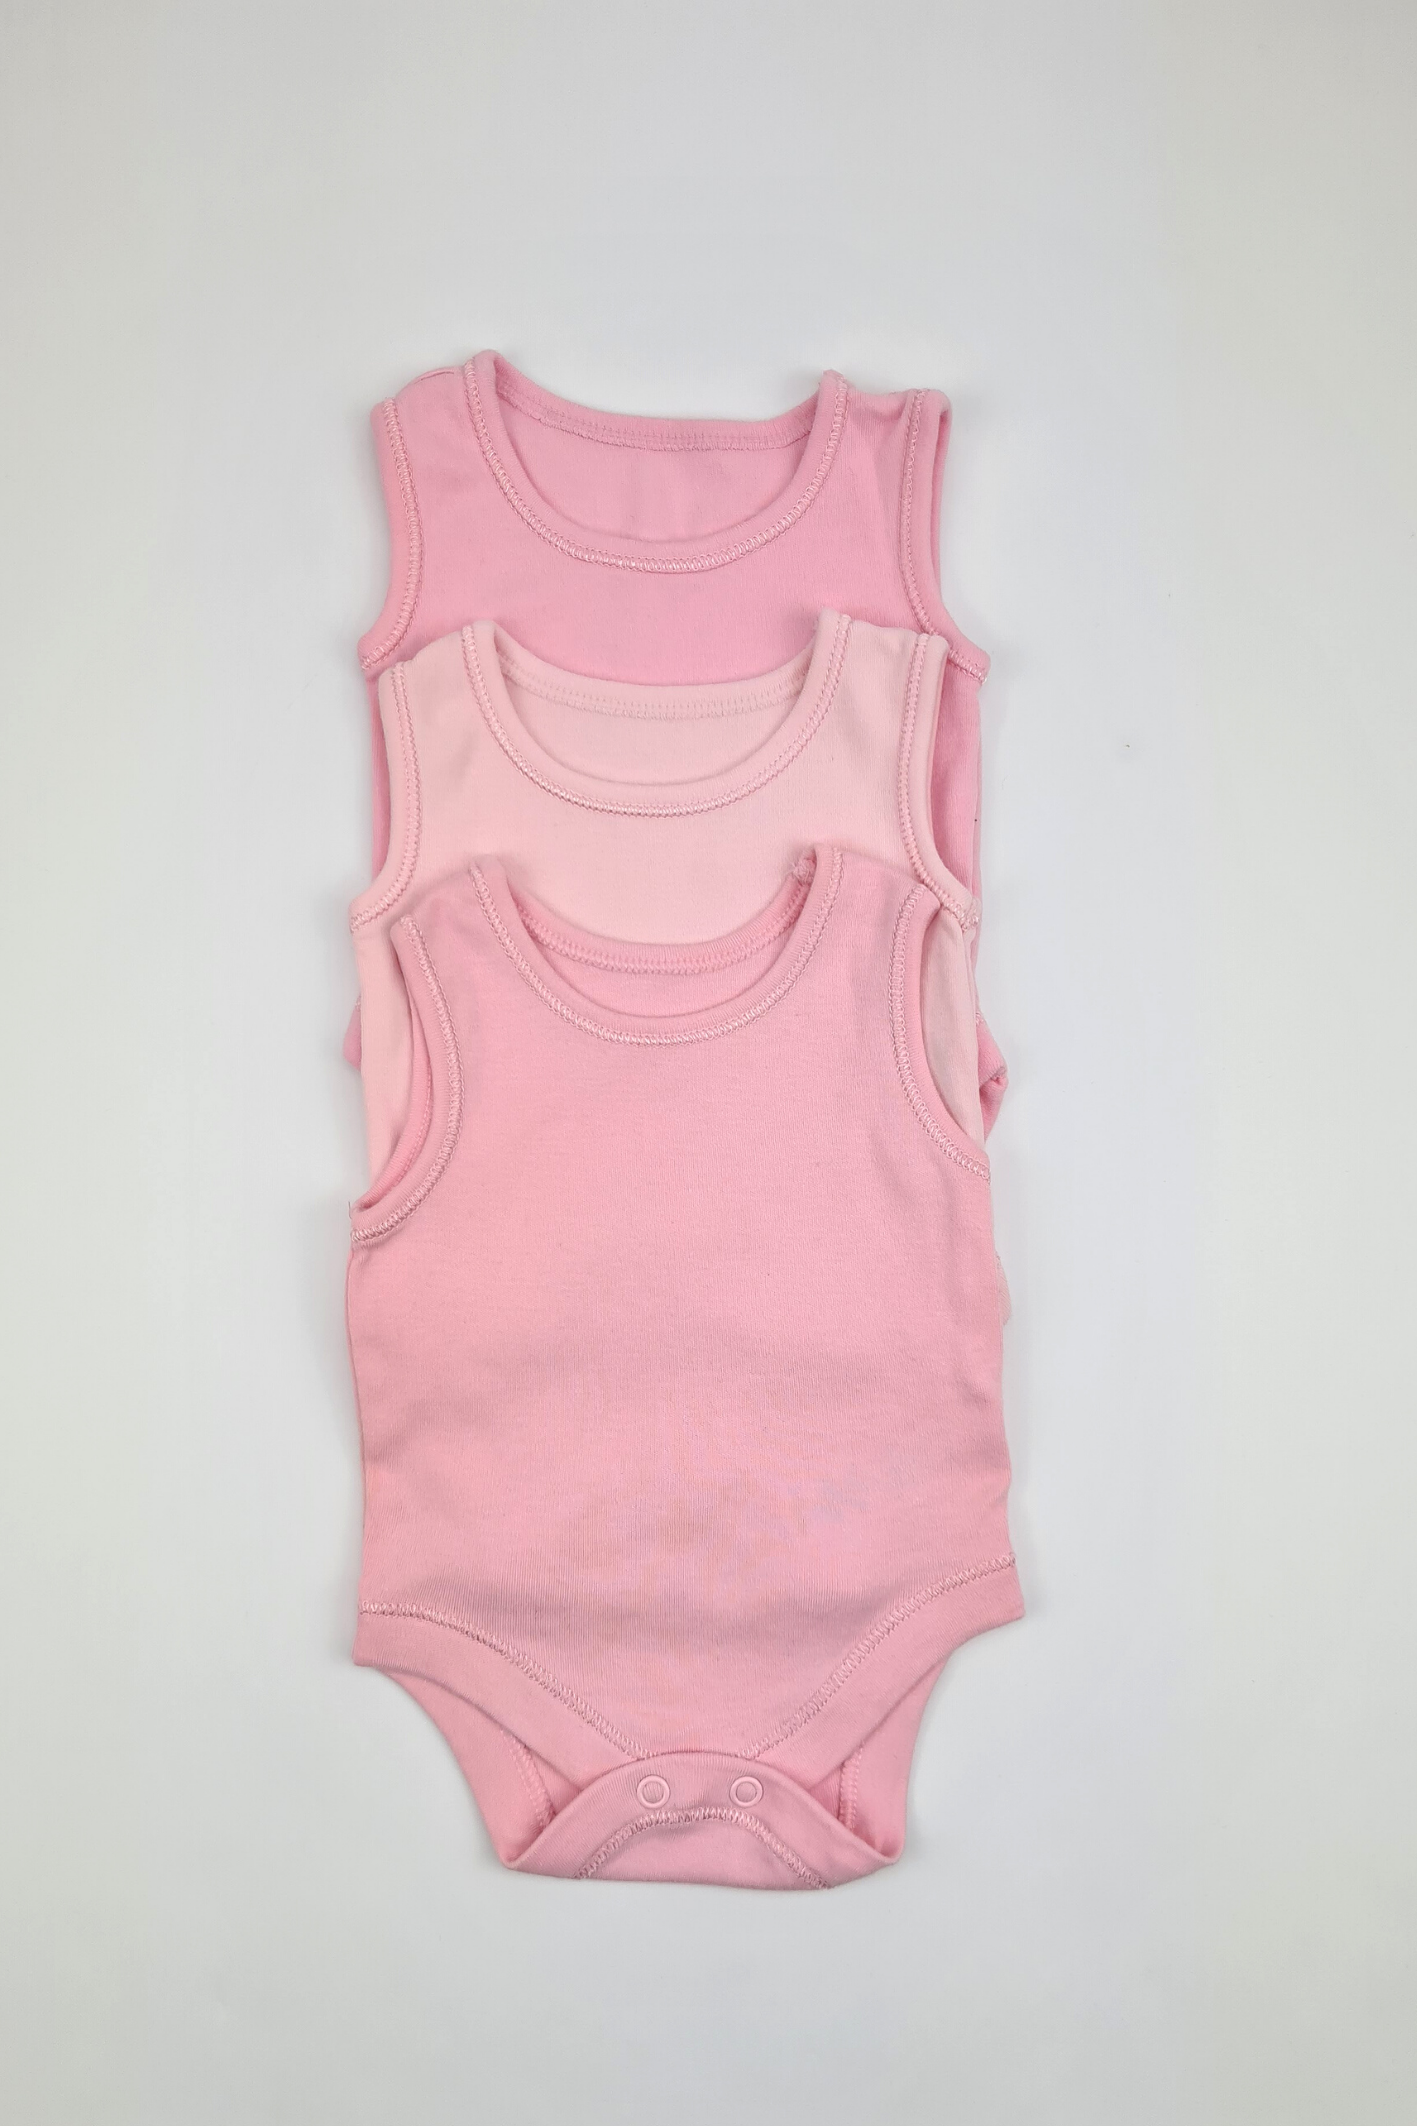 First Size 9lbs Pink Bodysuit Vest (George)